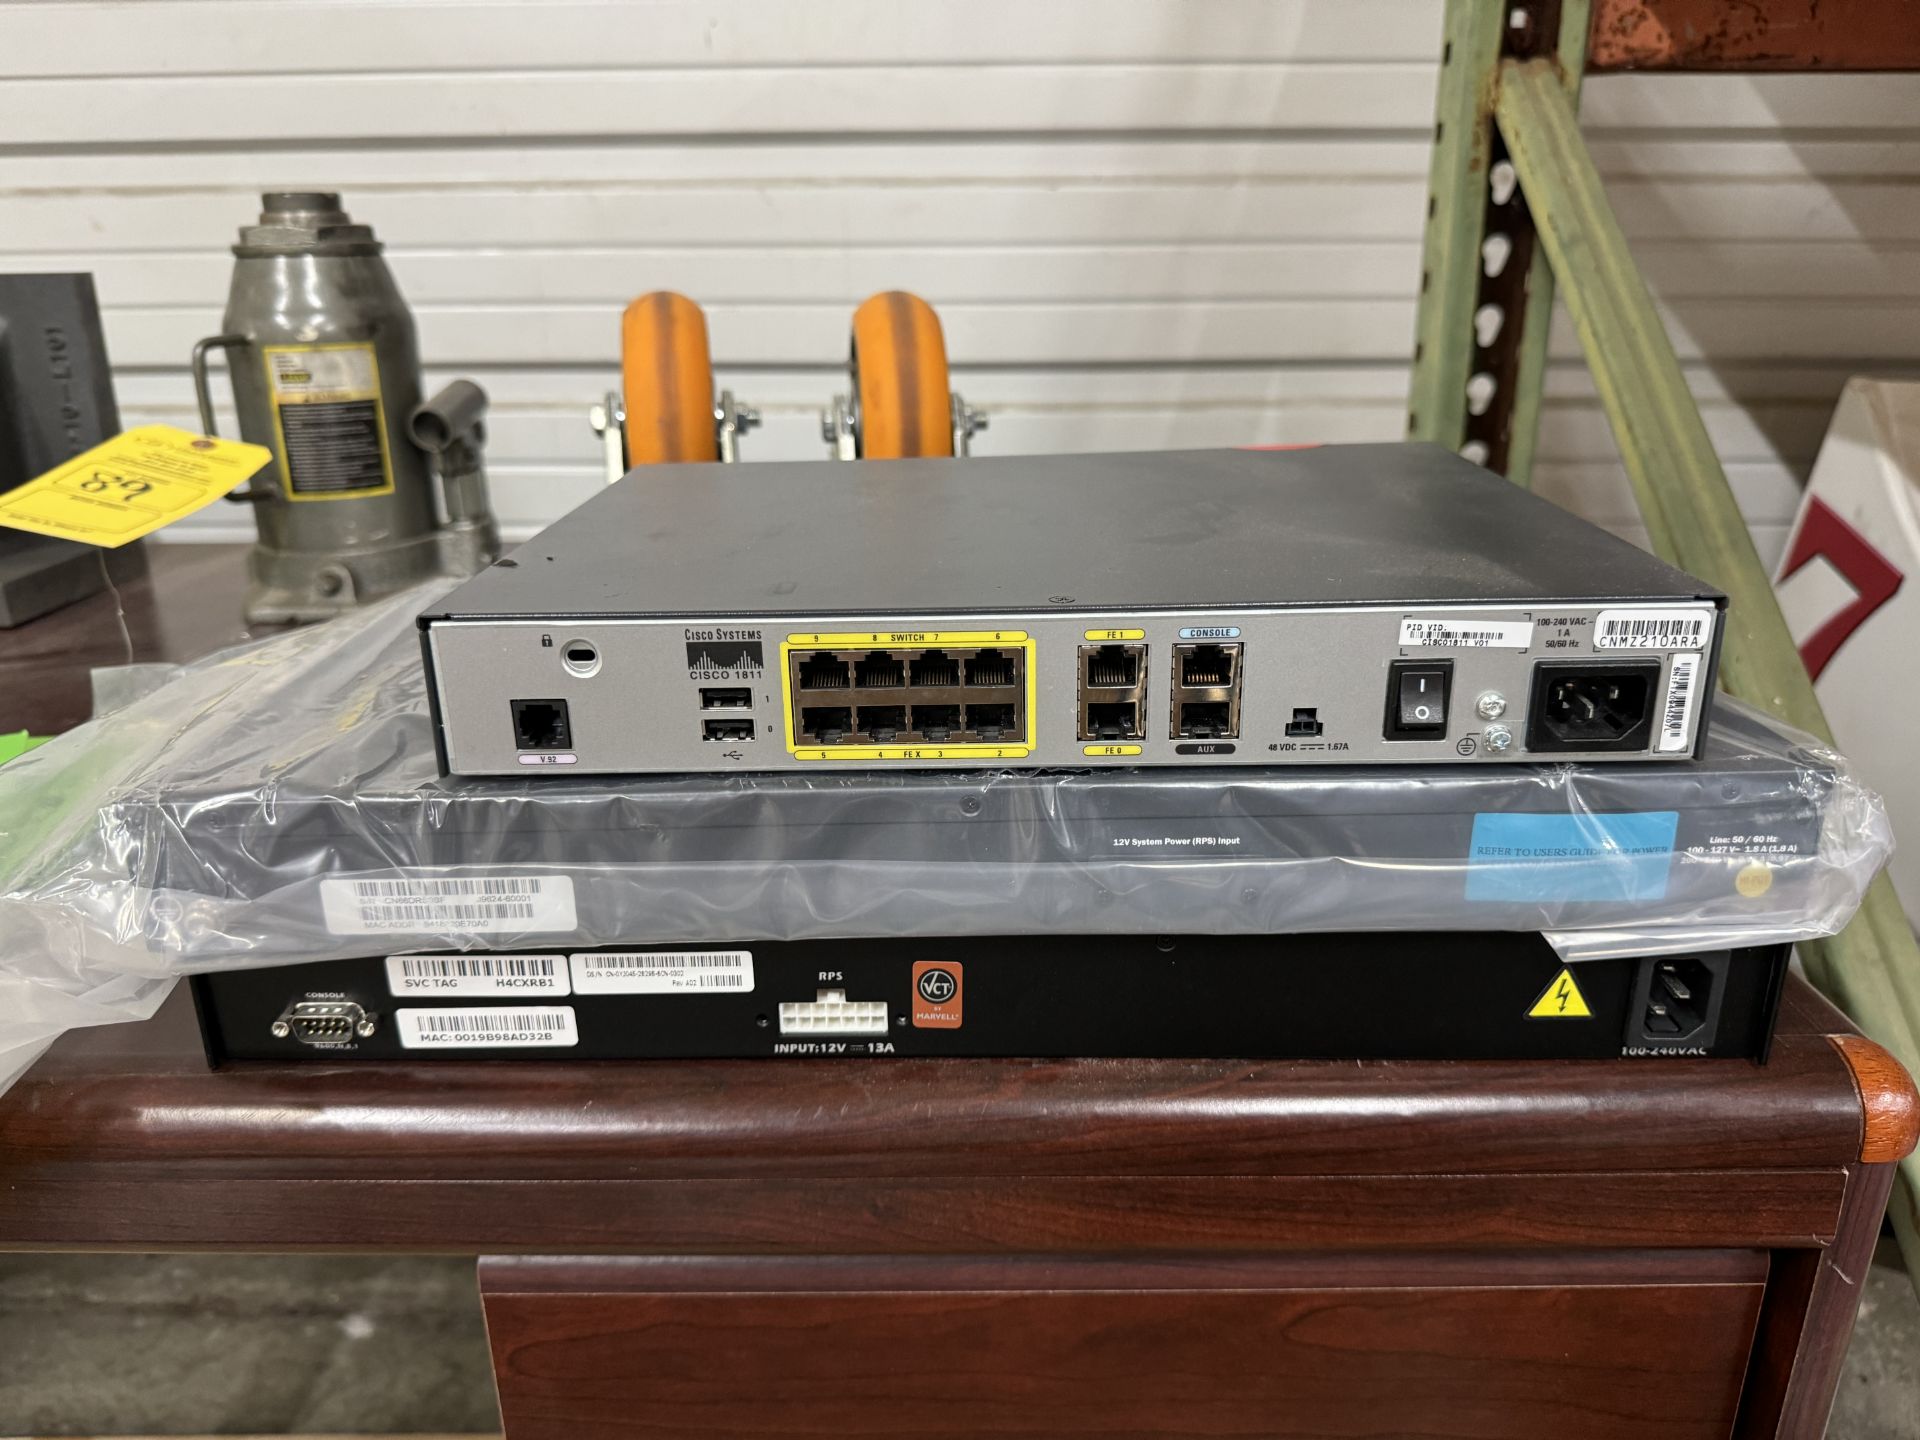 CISCO 1800 SERIES INTEGRATED SERVICE ROUTER; HP 2620-24 NETWORK SWITCH PORT; DELL POWER CONNECT